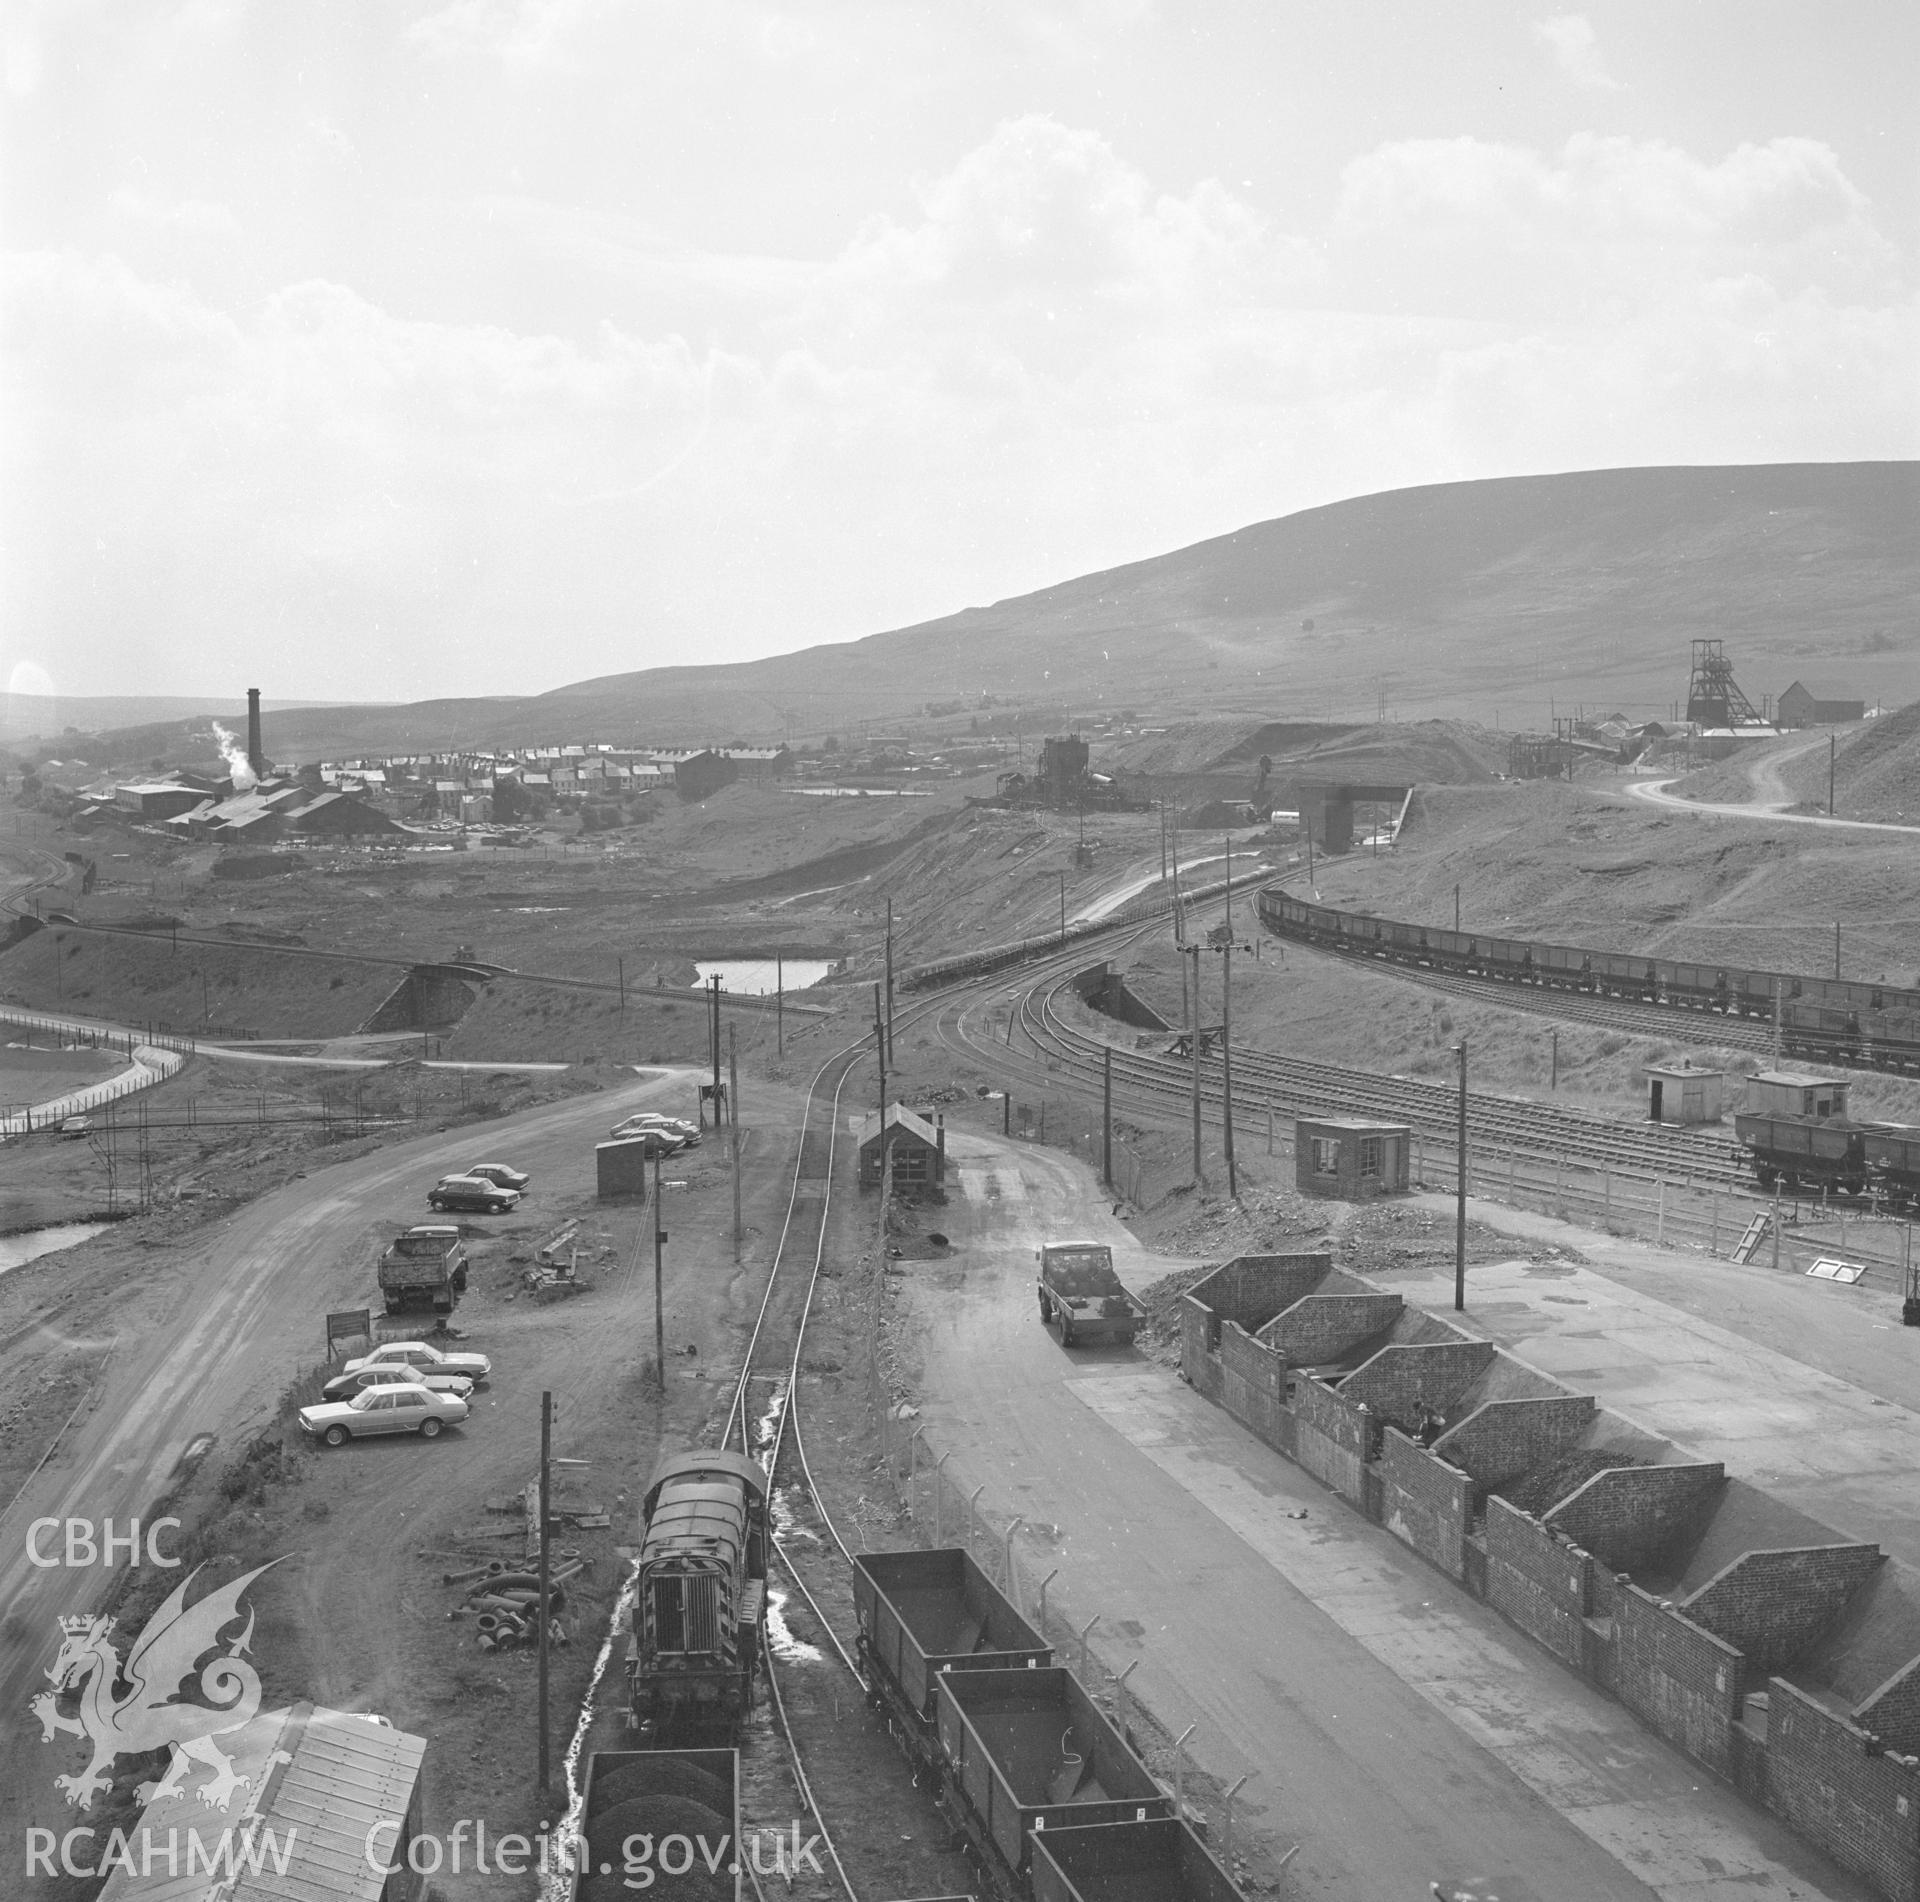 Digital copy of an acetate negative showing general view of land sales yard at Big Pit, from the John Cornwell Collection.